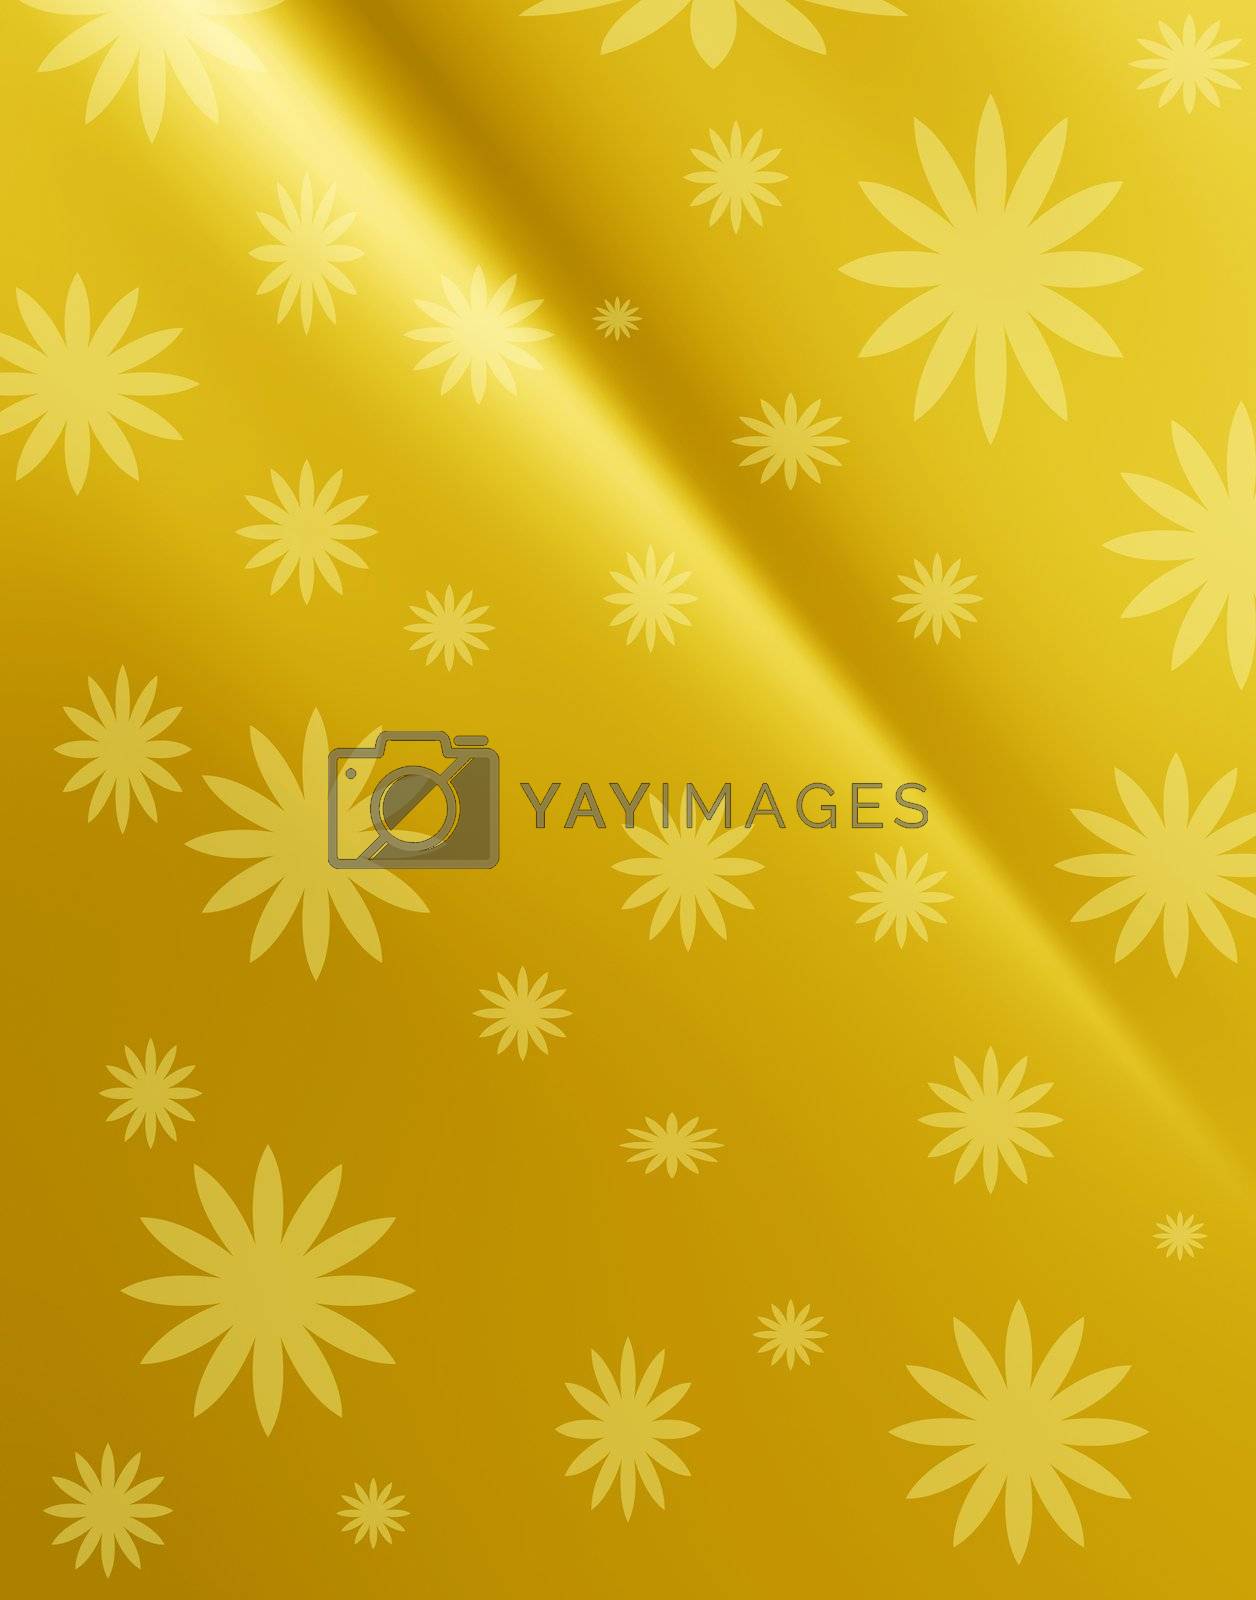 Royalty free image of Abstract background by janaka